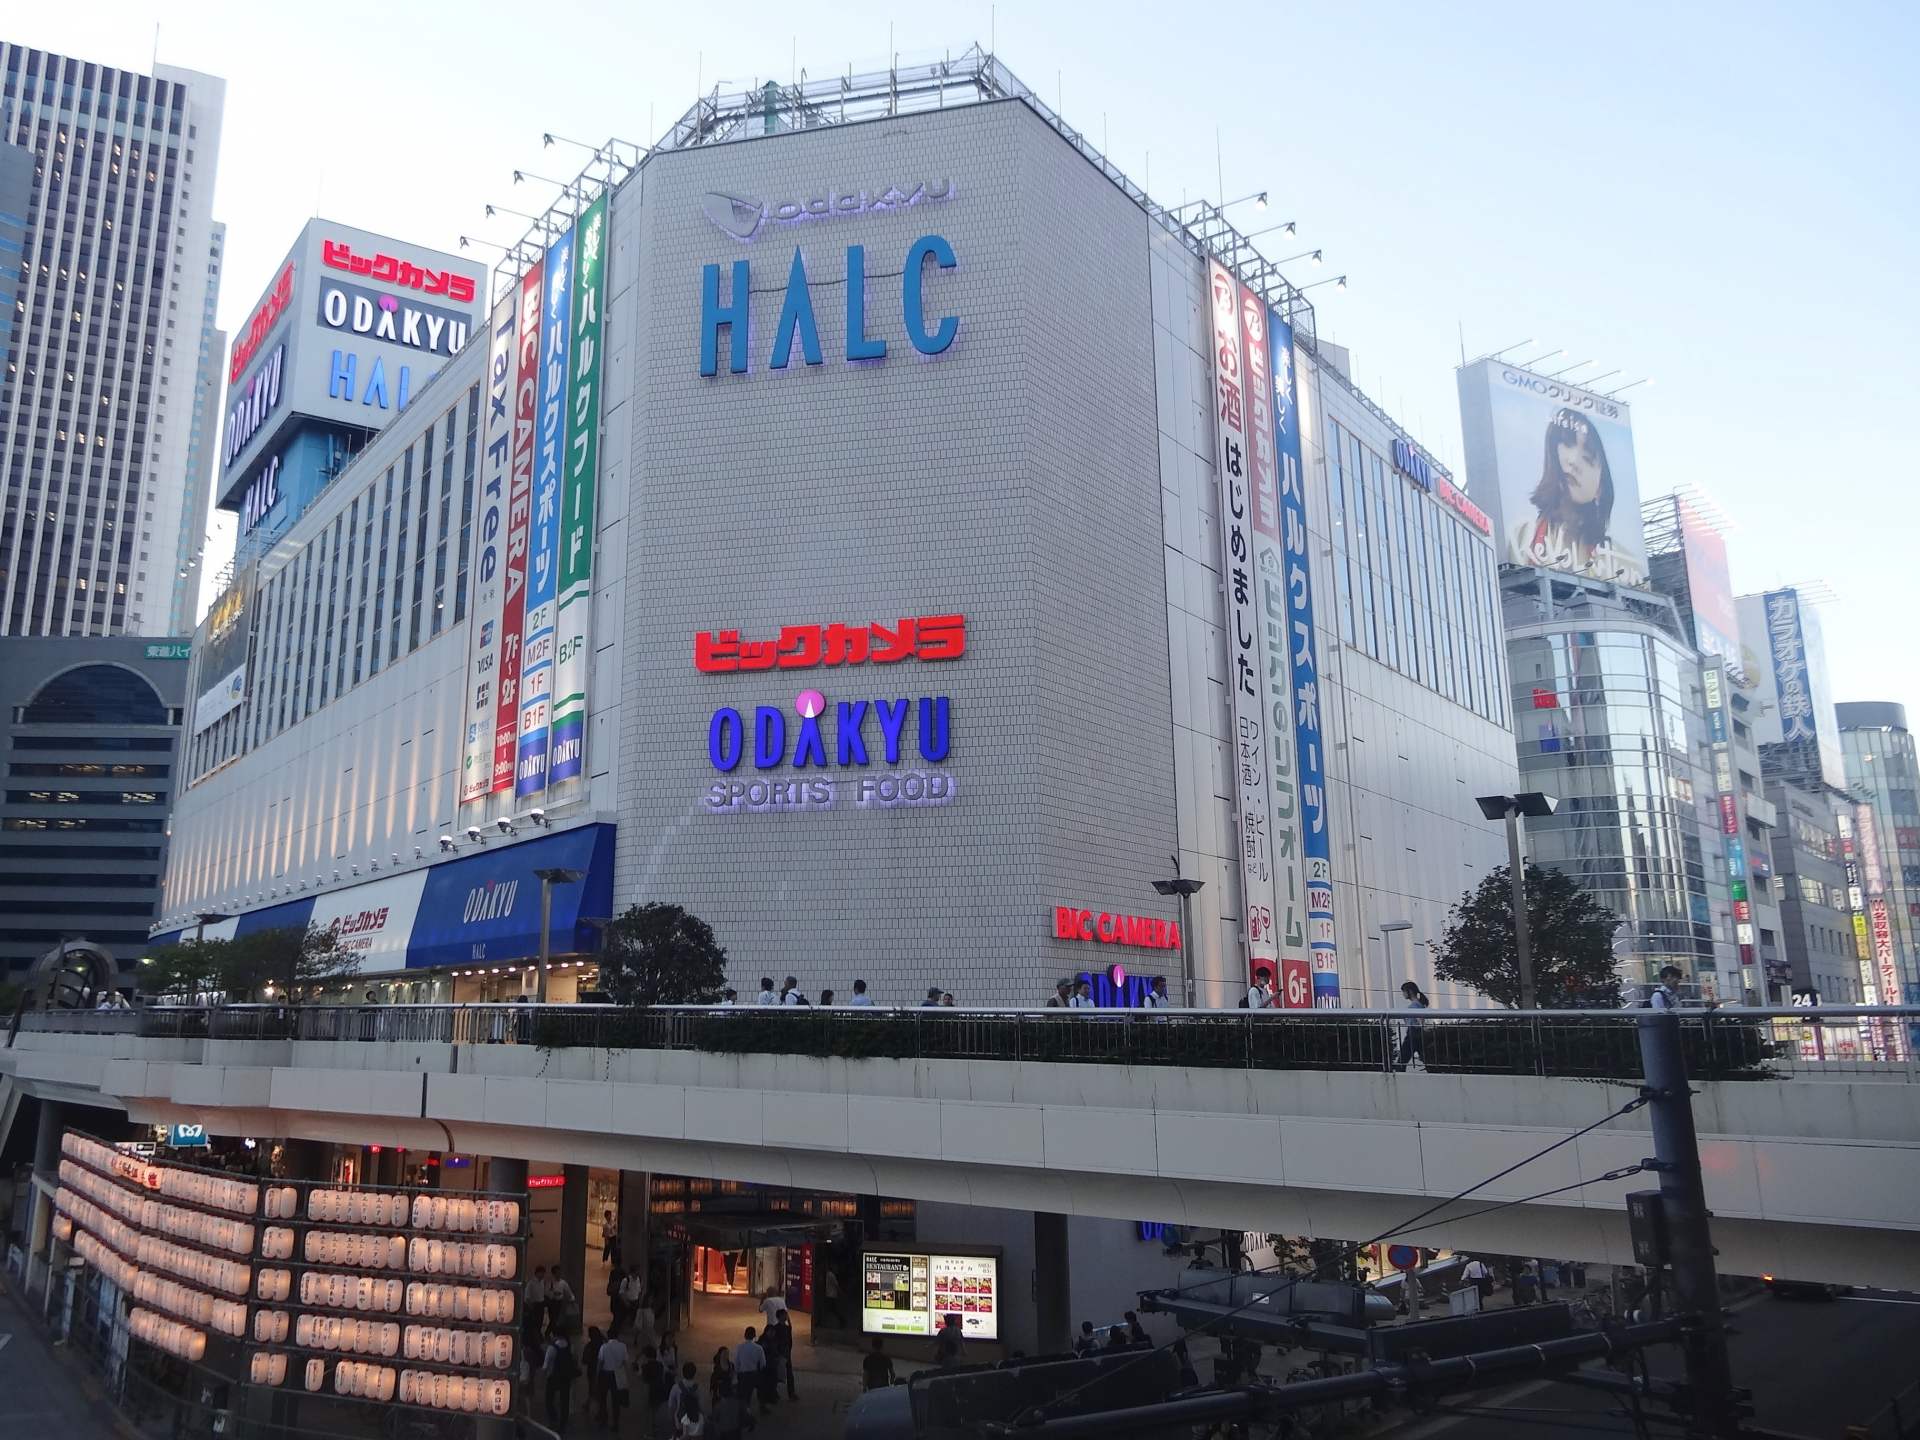 Shinjuku Station West Exit Halc Where To Shop Access Hours Price Good Luck Trip